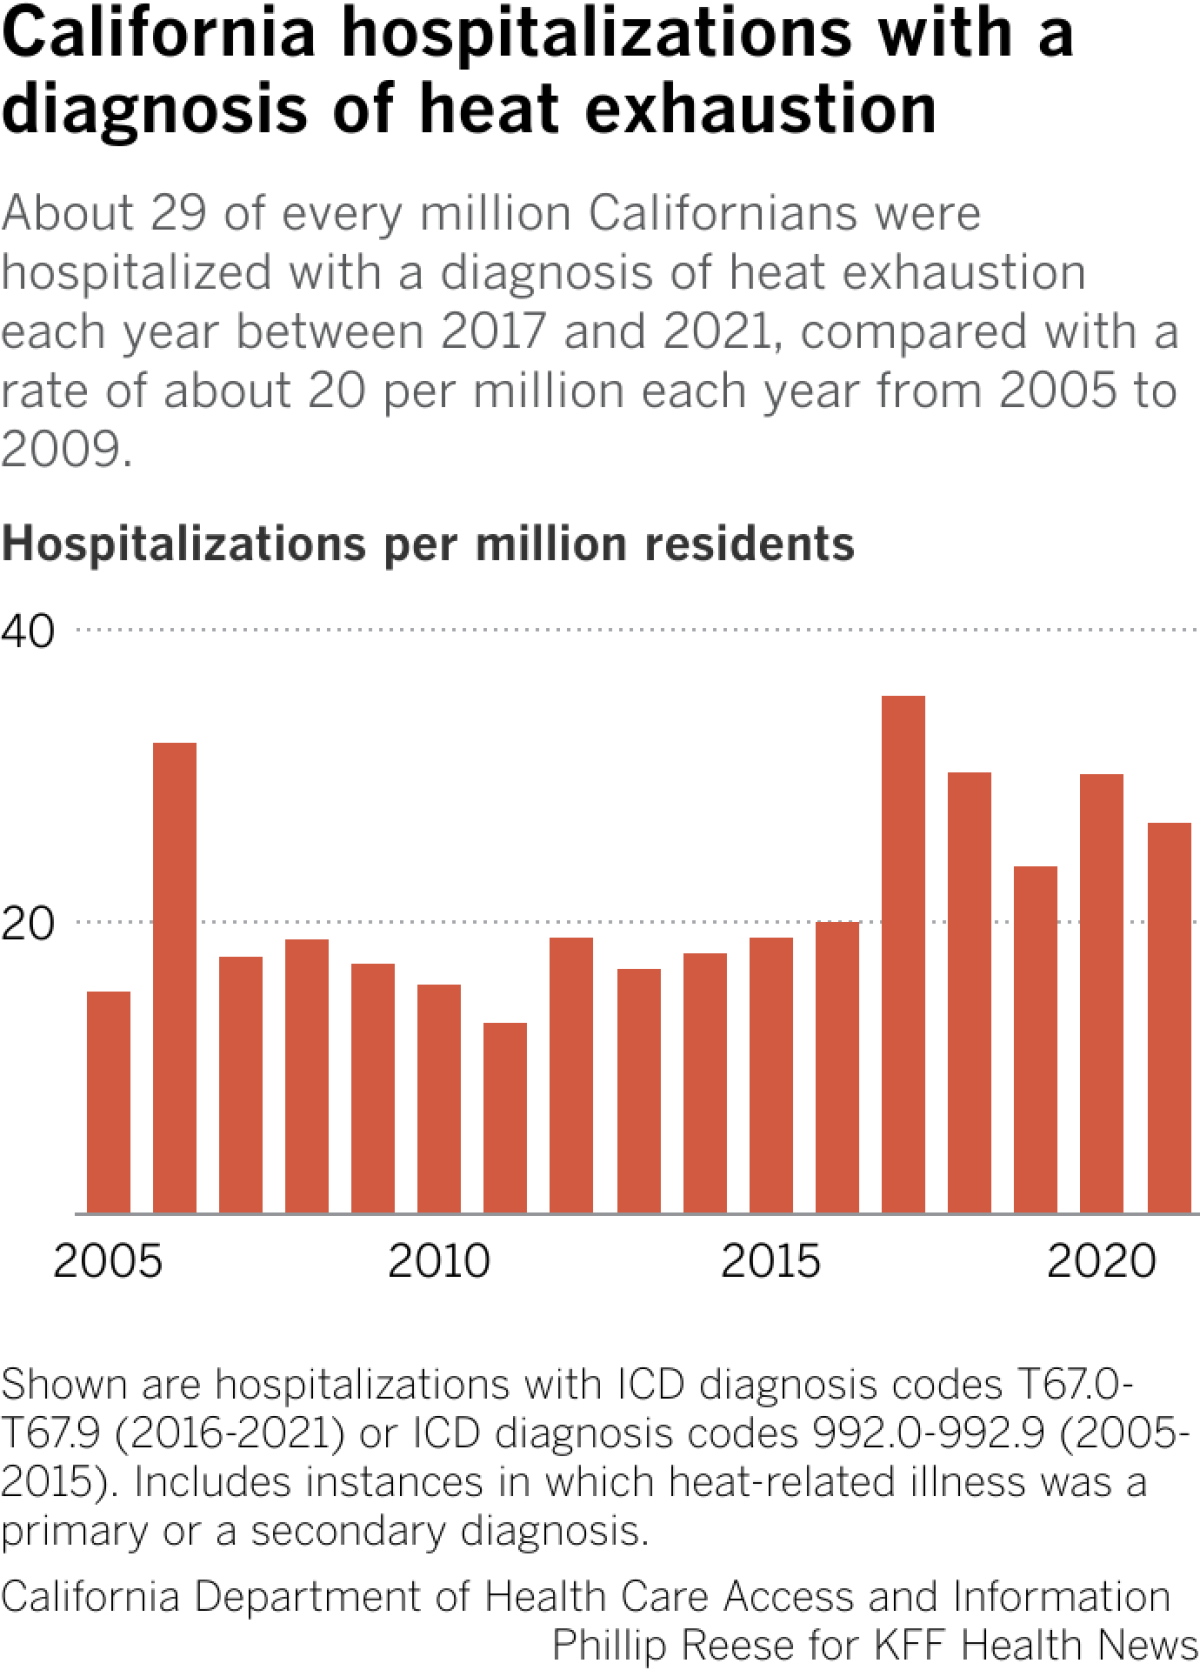 Bar chart shows heat exhaustion hospitalizations by year. Hospitalizations peaked in 2017.